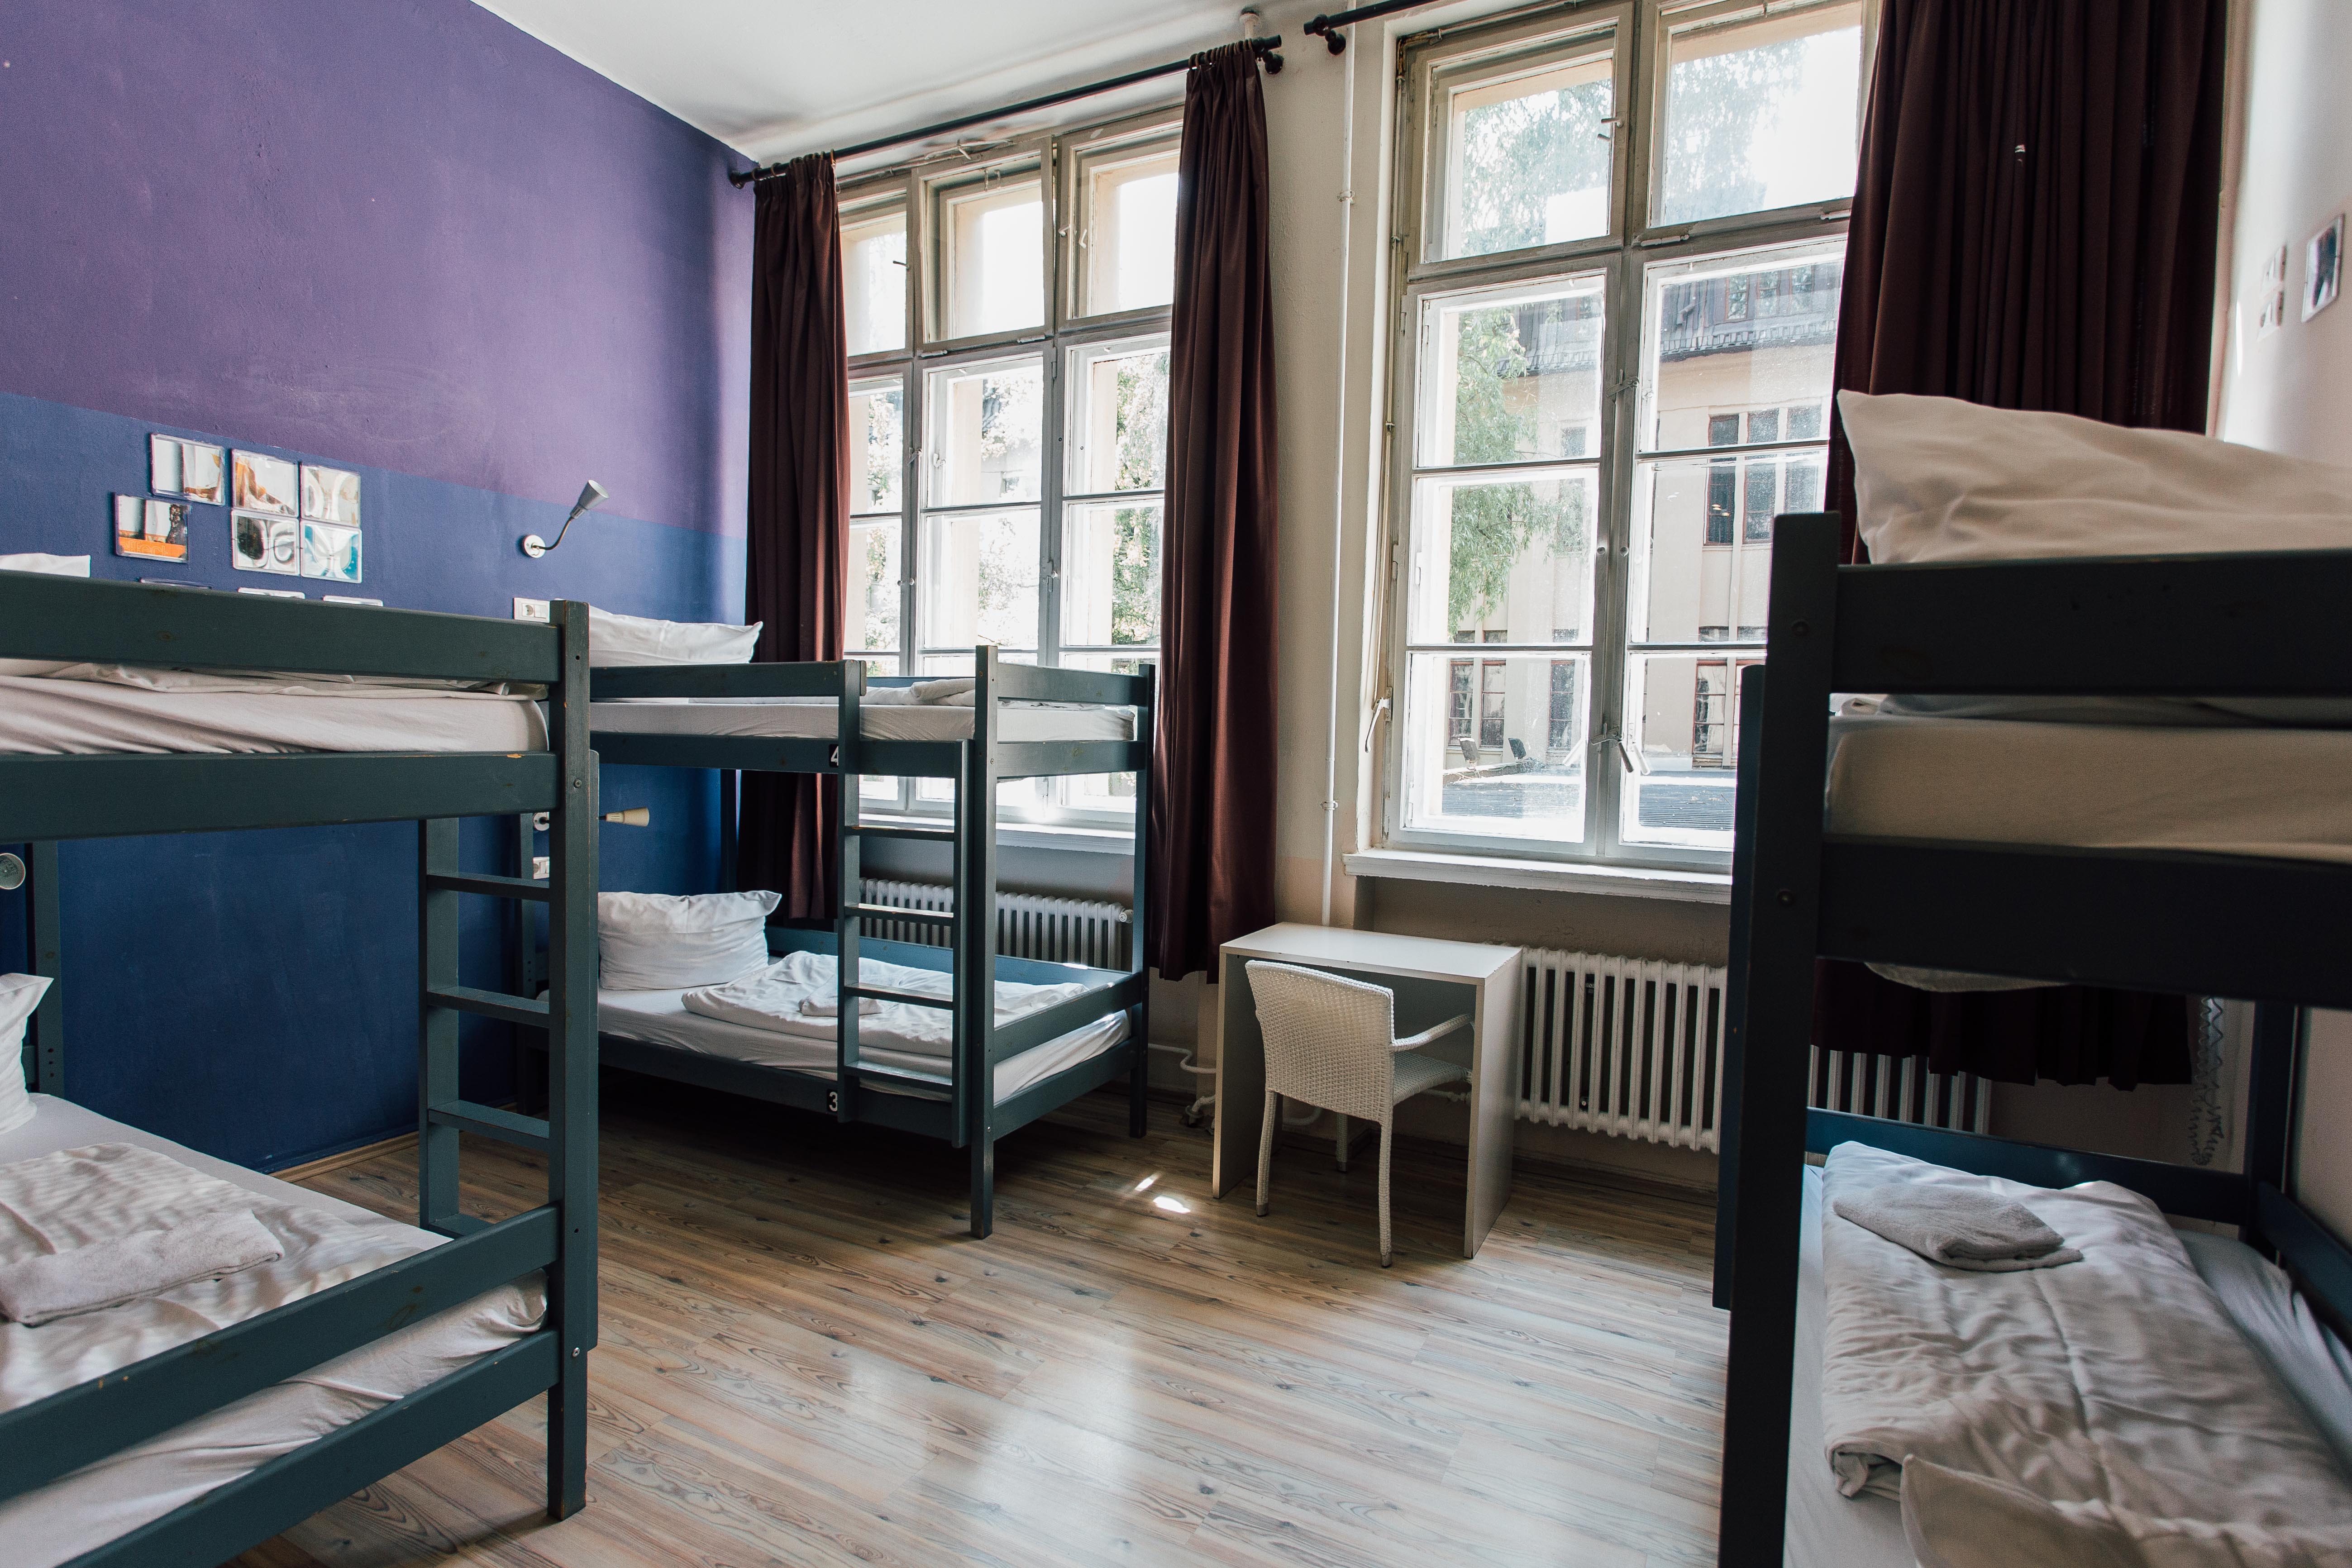 Best Hostels In Europe For 2017. | The Collective - Powered by Topdeck Travel